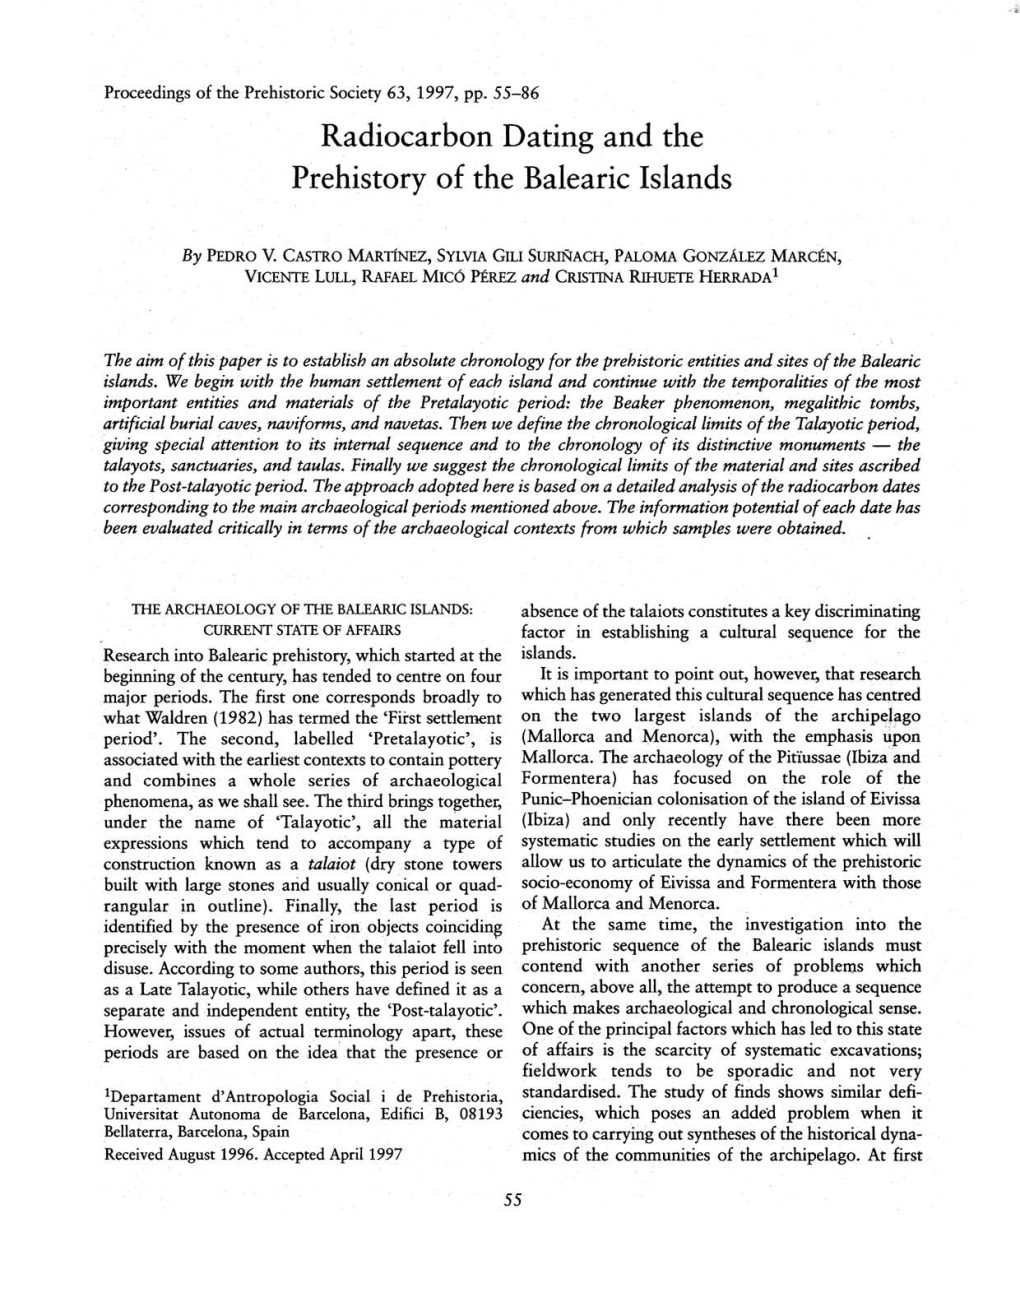 Radiocarbon Dating and the Prehistory of the Balearic Islands